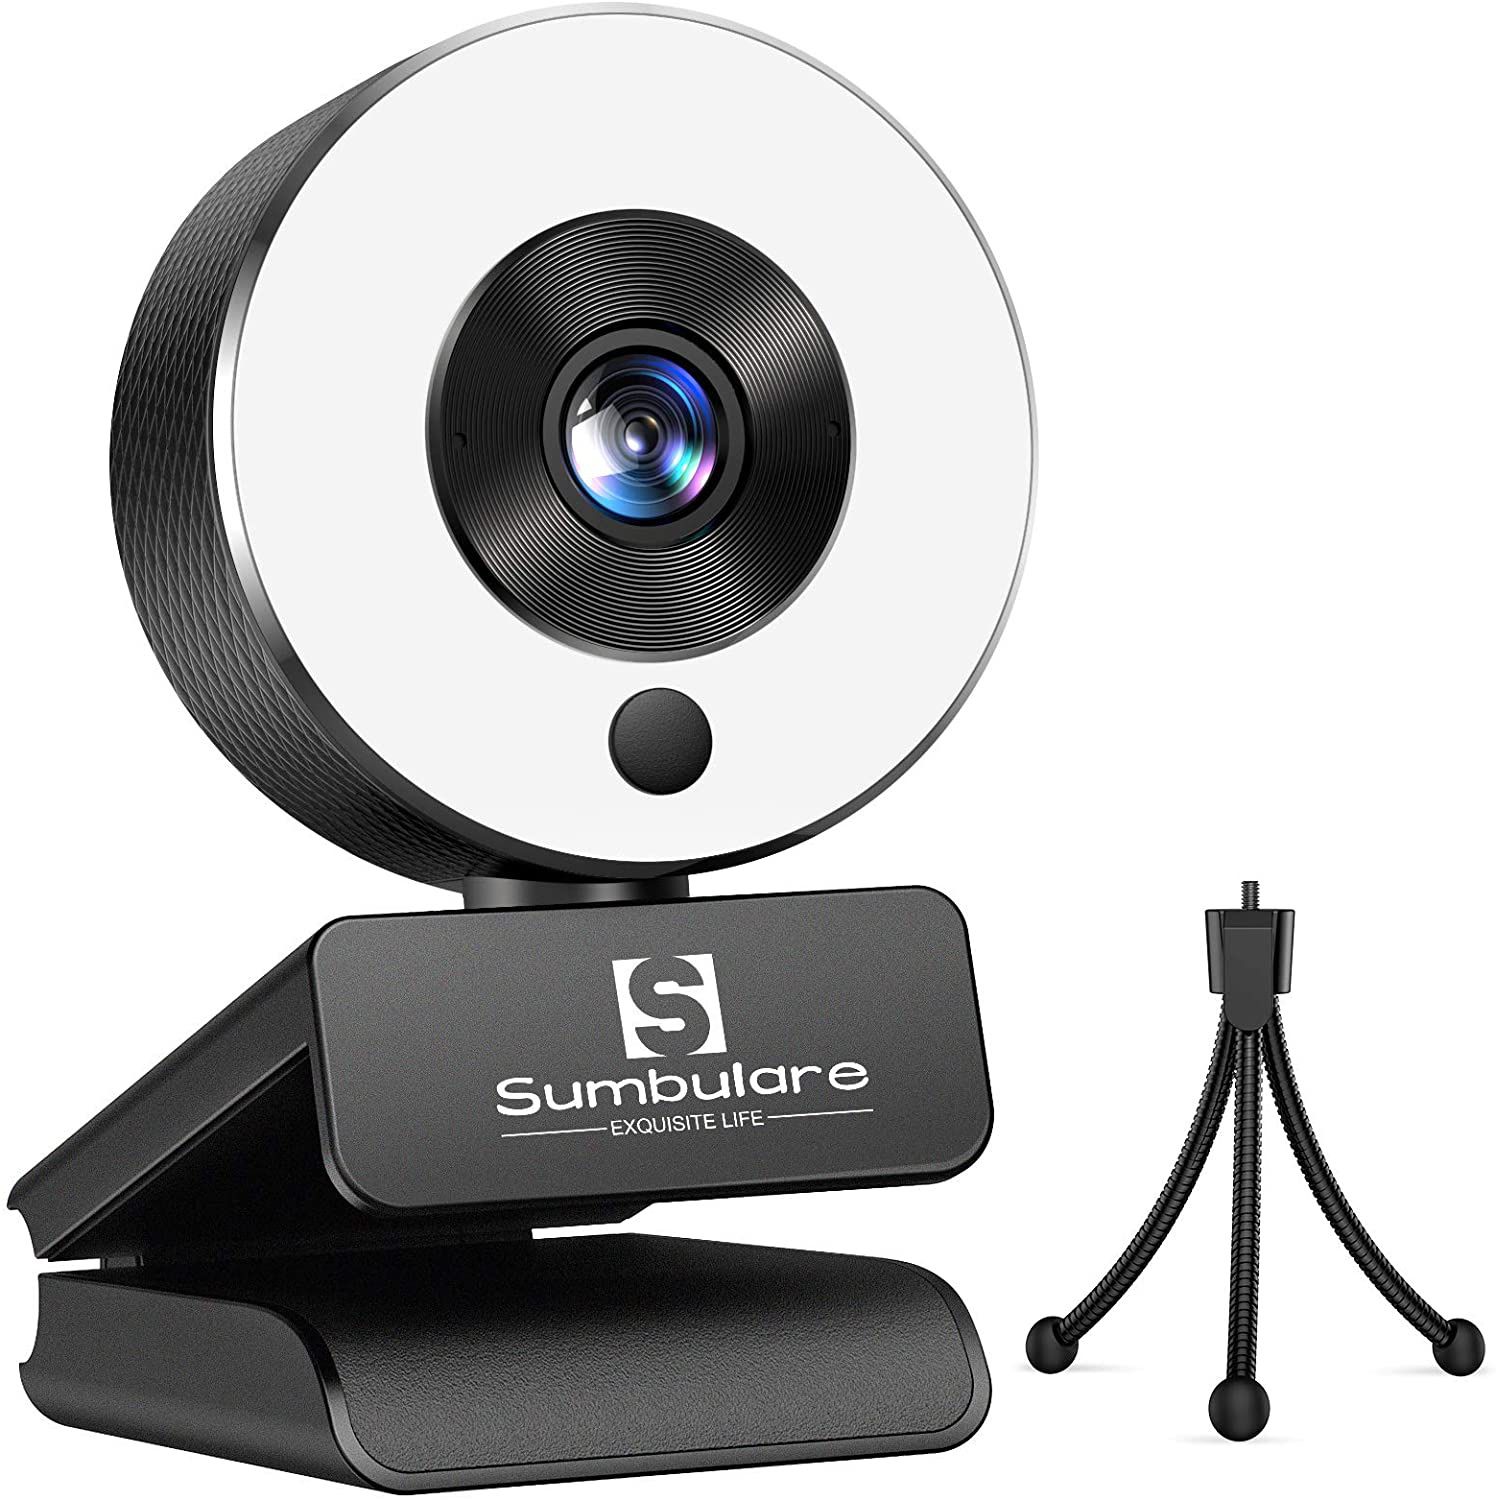 2K Ultra HD Streaming Webcam, sumbulare Webcam with Microphone, Adjustable Ring Light and Tripod, Plug and Play Web Camera, Autofocus AF PC Mac Video 